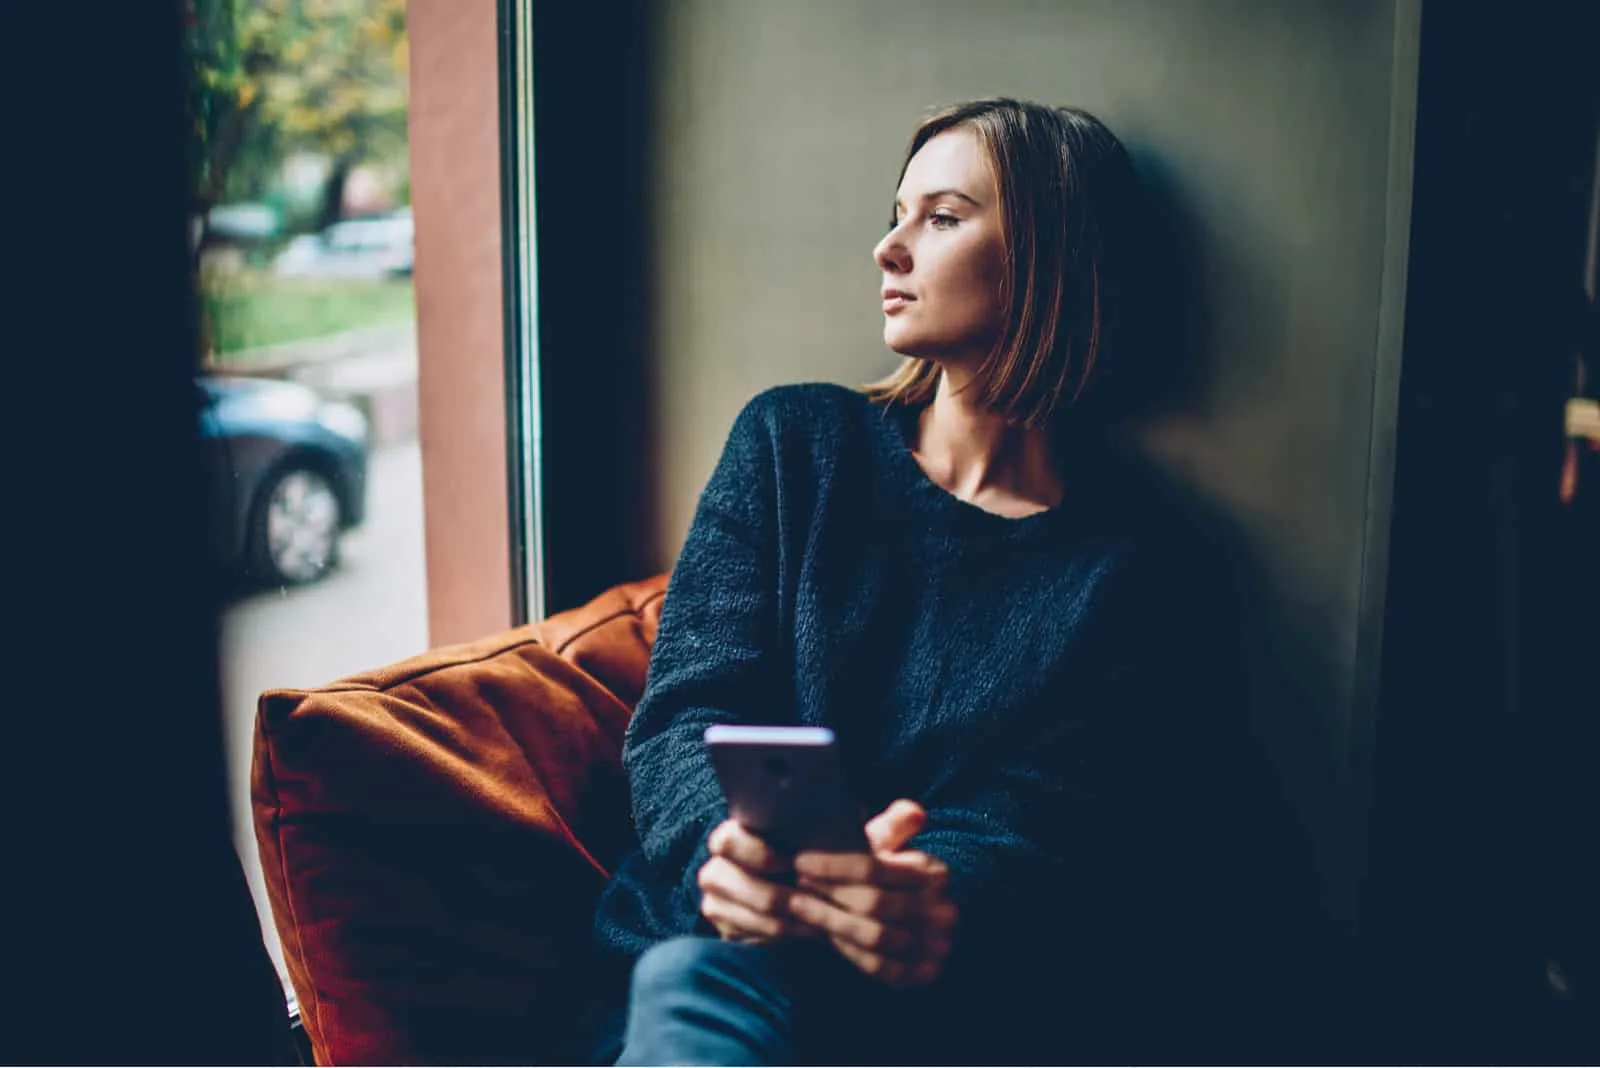 mindful woman sitting on sofa with mobile phone in hand